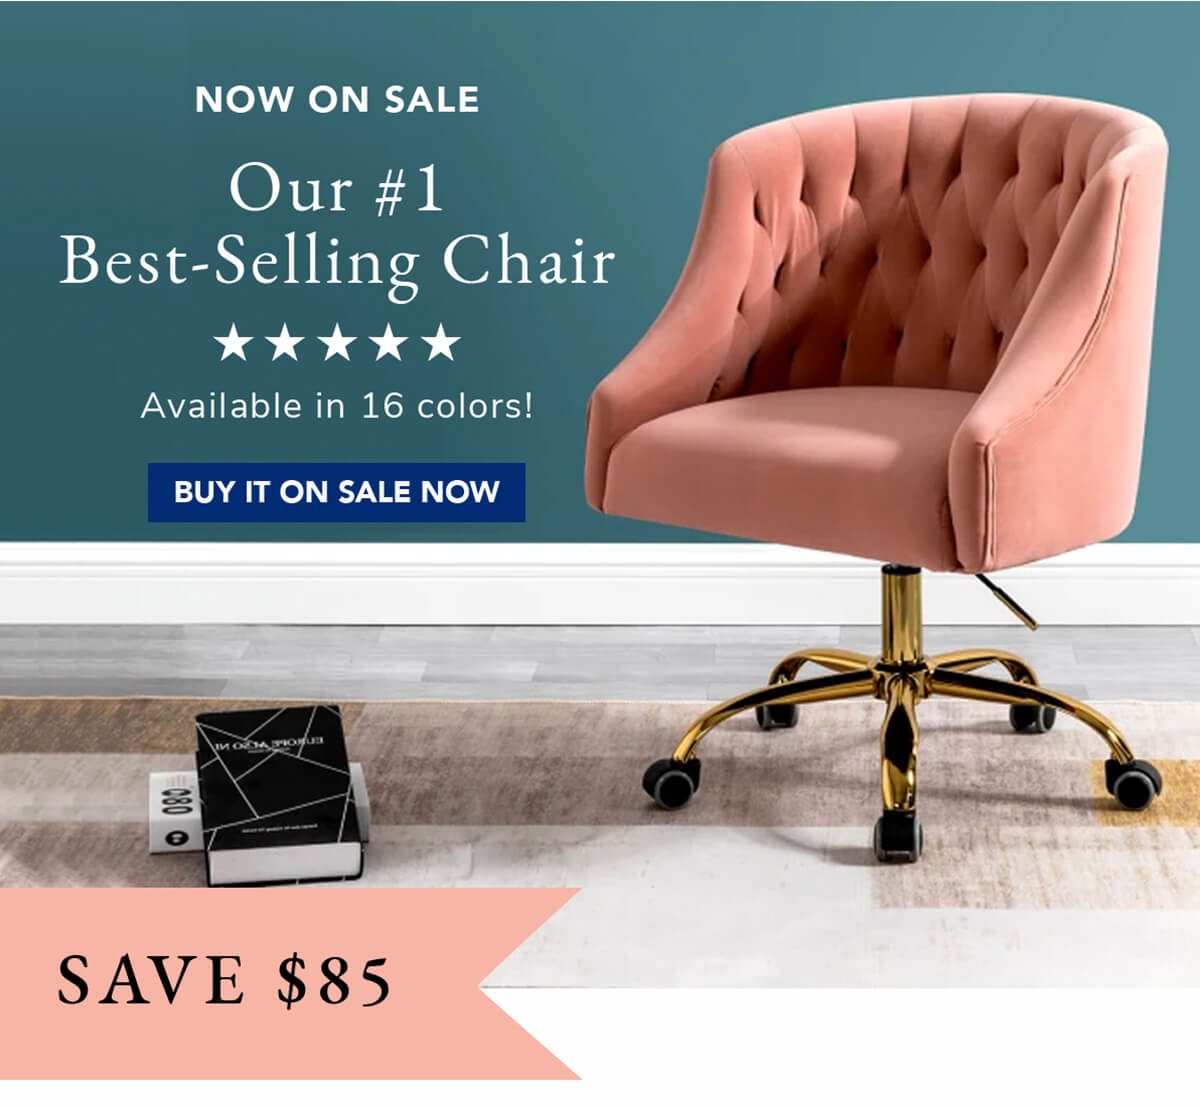 Now on sale. Our #1 Best-Selling Chair. Anika Chair | BUY IT ON SALE NOW